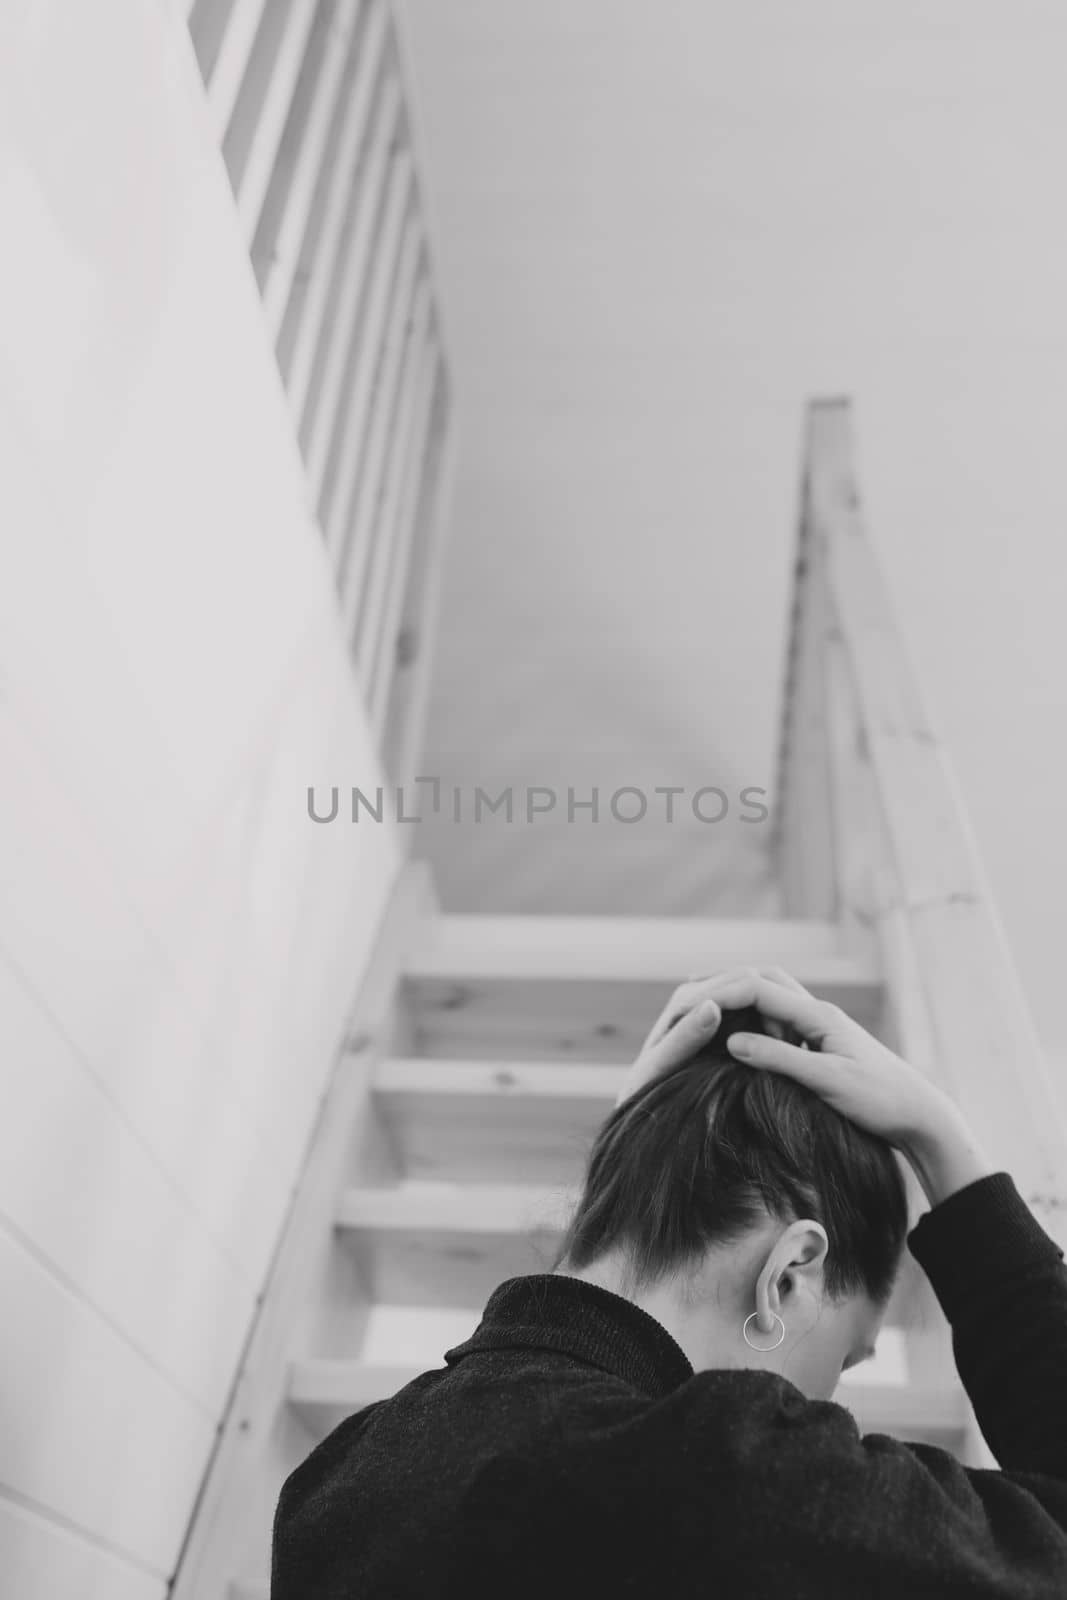 Young woman simple hairstyle back view by wooden stairs at home. Depression, loneliness, quarantine concept. Mental health, Self care, staying home